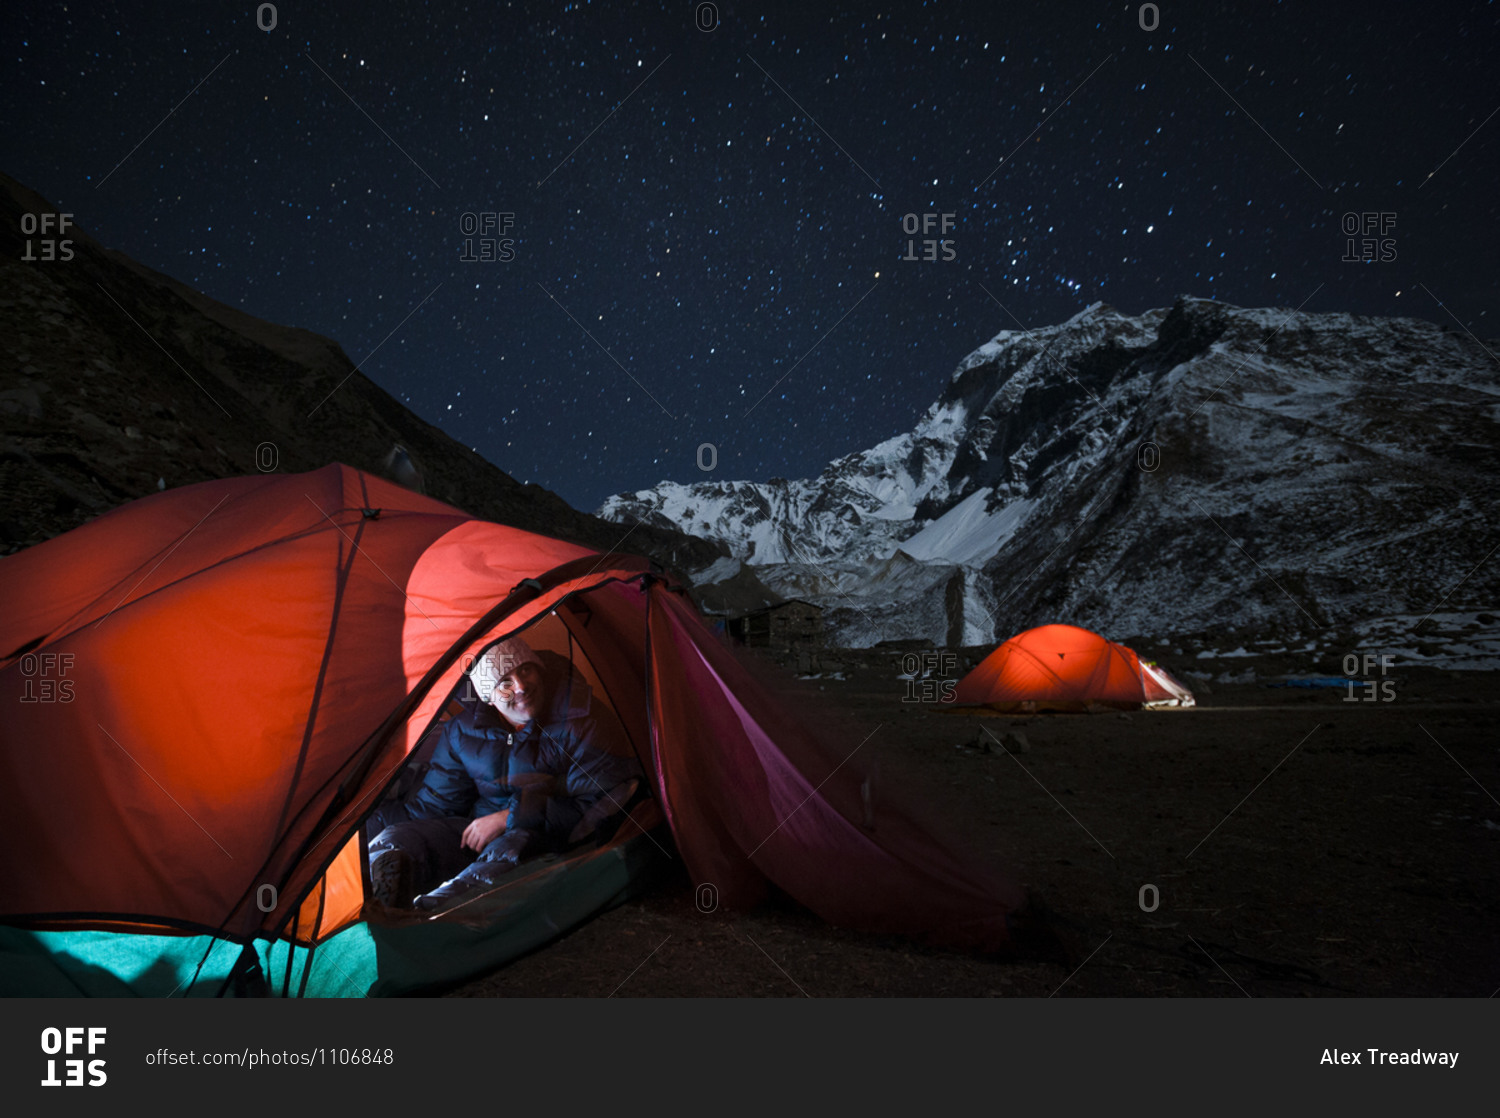 Enjoying the clear night sky view from a tent at Samdo on the Manaslu circuit trek